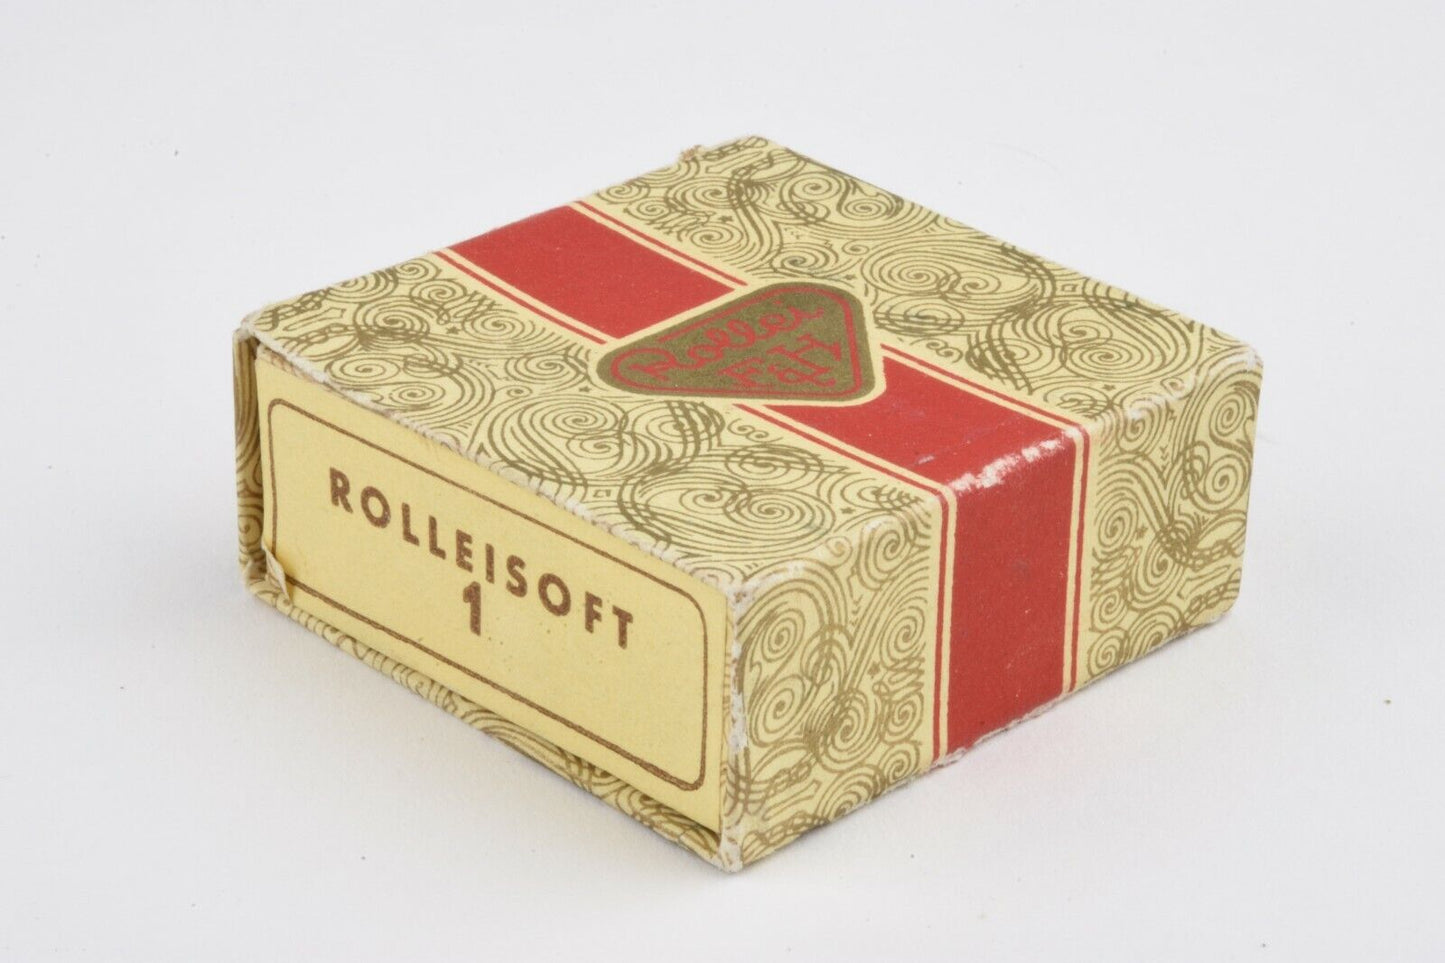 MINT- BOXED ROLLEI ROLLEISOFT 1 28.5mm BAY 1 FILTER, NICE & CLEAN w/CASE + BOX